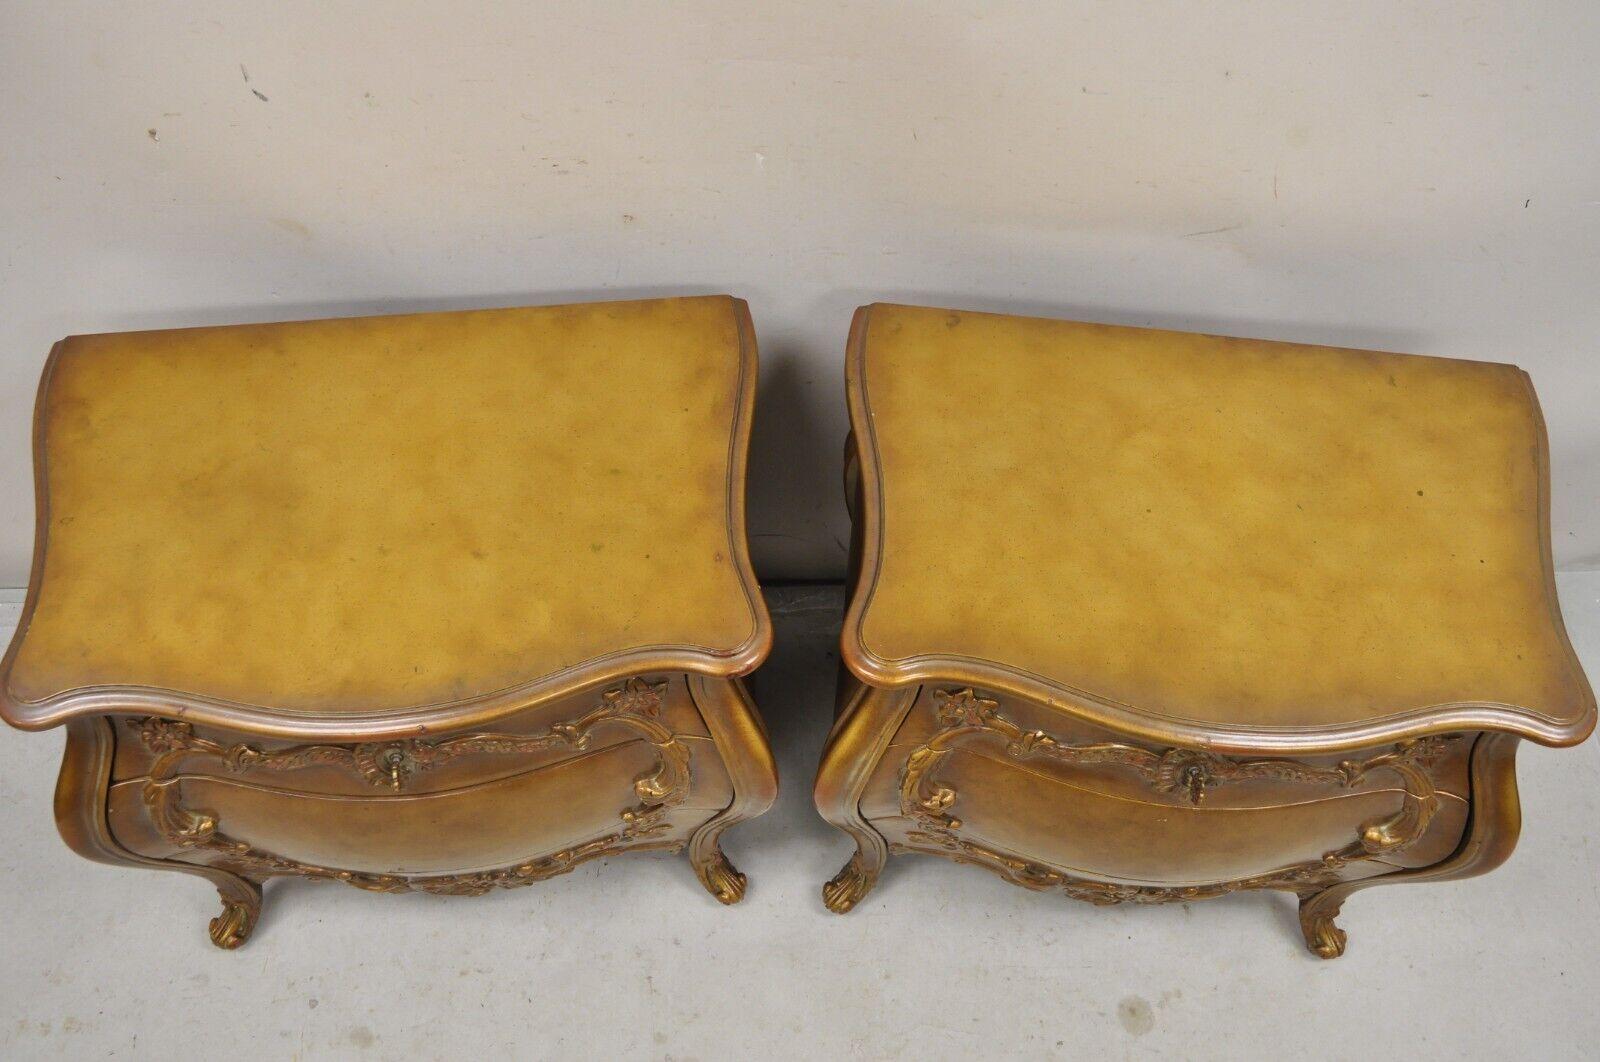 20th Century Vintage French Rococo Baroque Style Gold Gilt Bombe Nightstands - a Pair For Sale